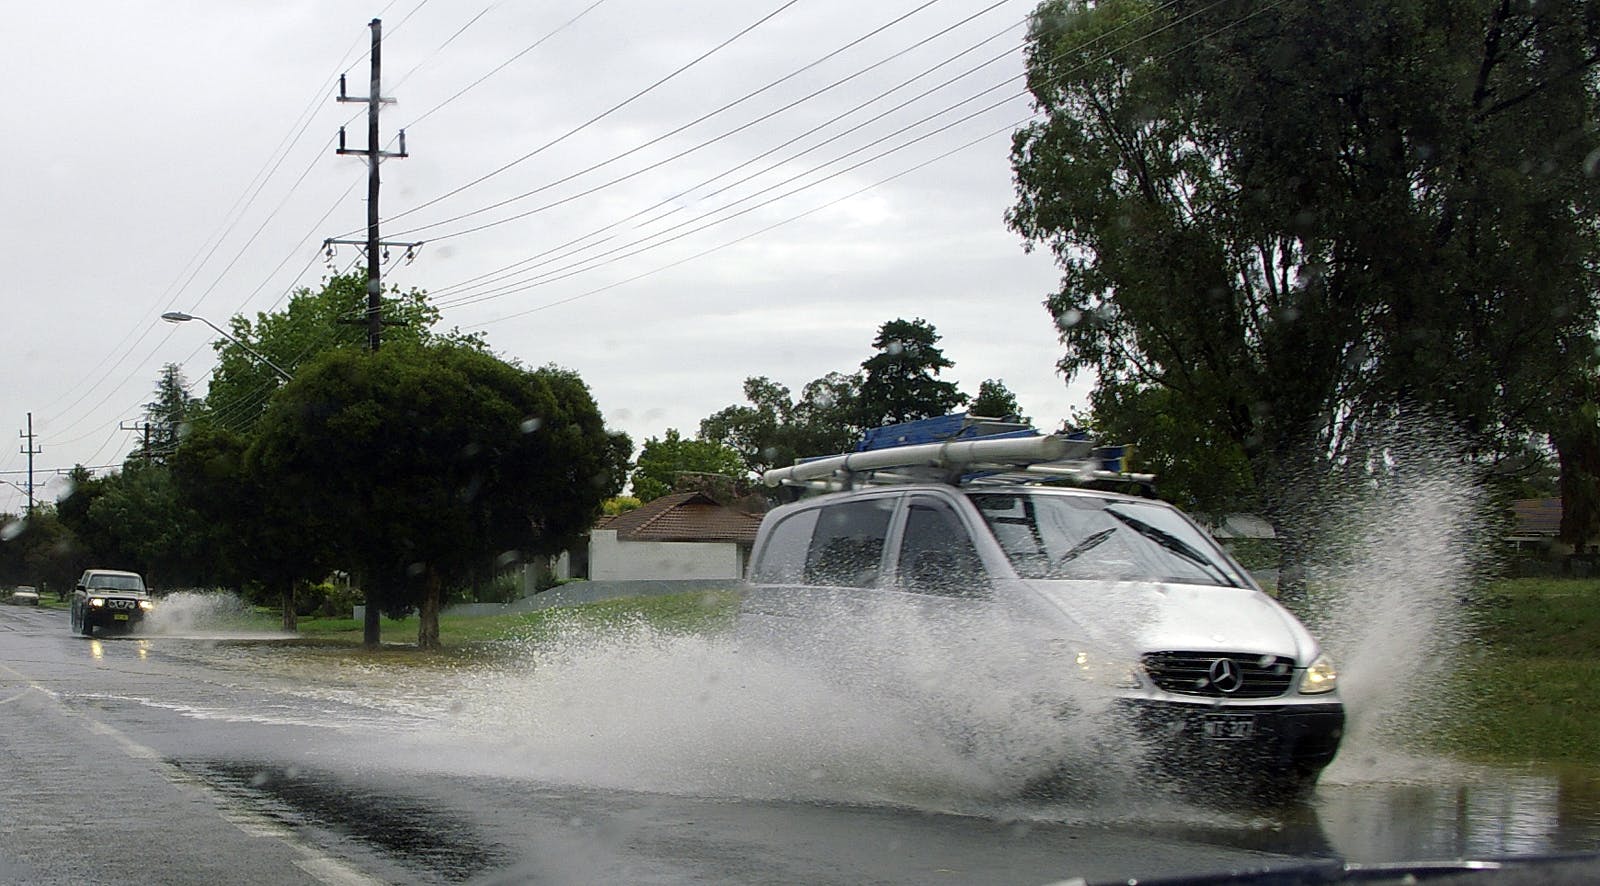 Aquaplaning of two vehicles